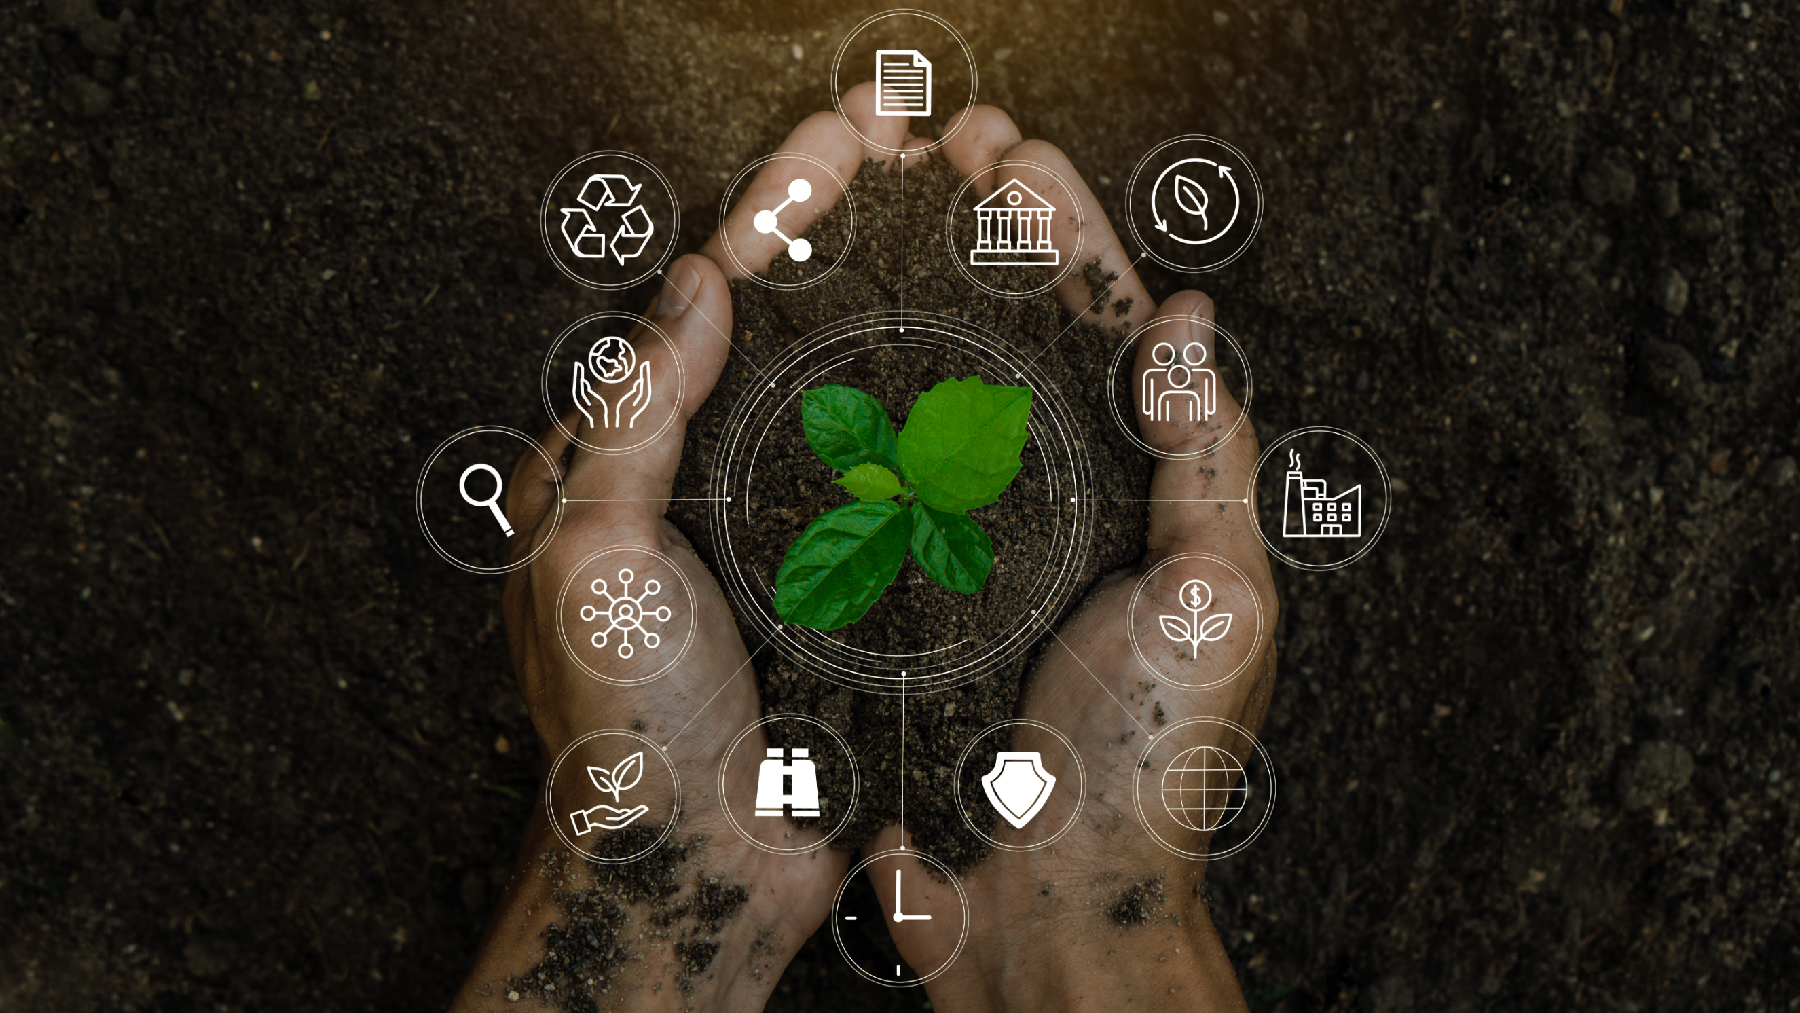 hands holding soil with a growing seedling to represent sustainability, overlaid with technology icons